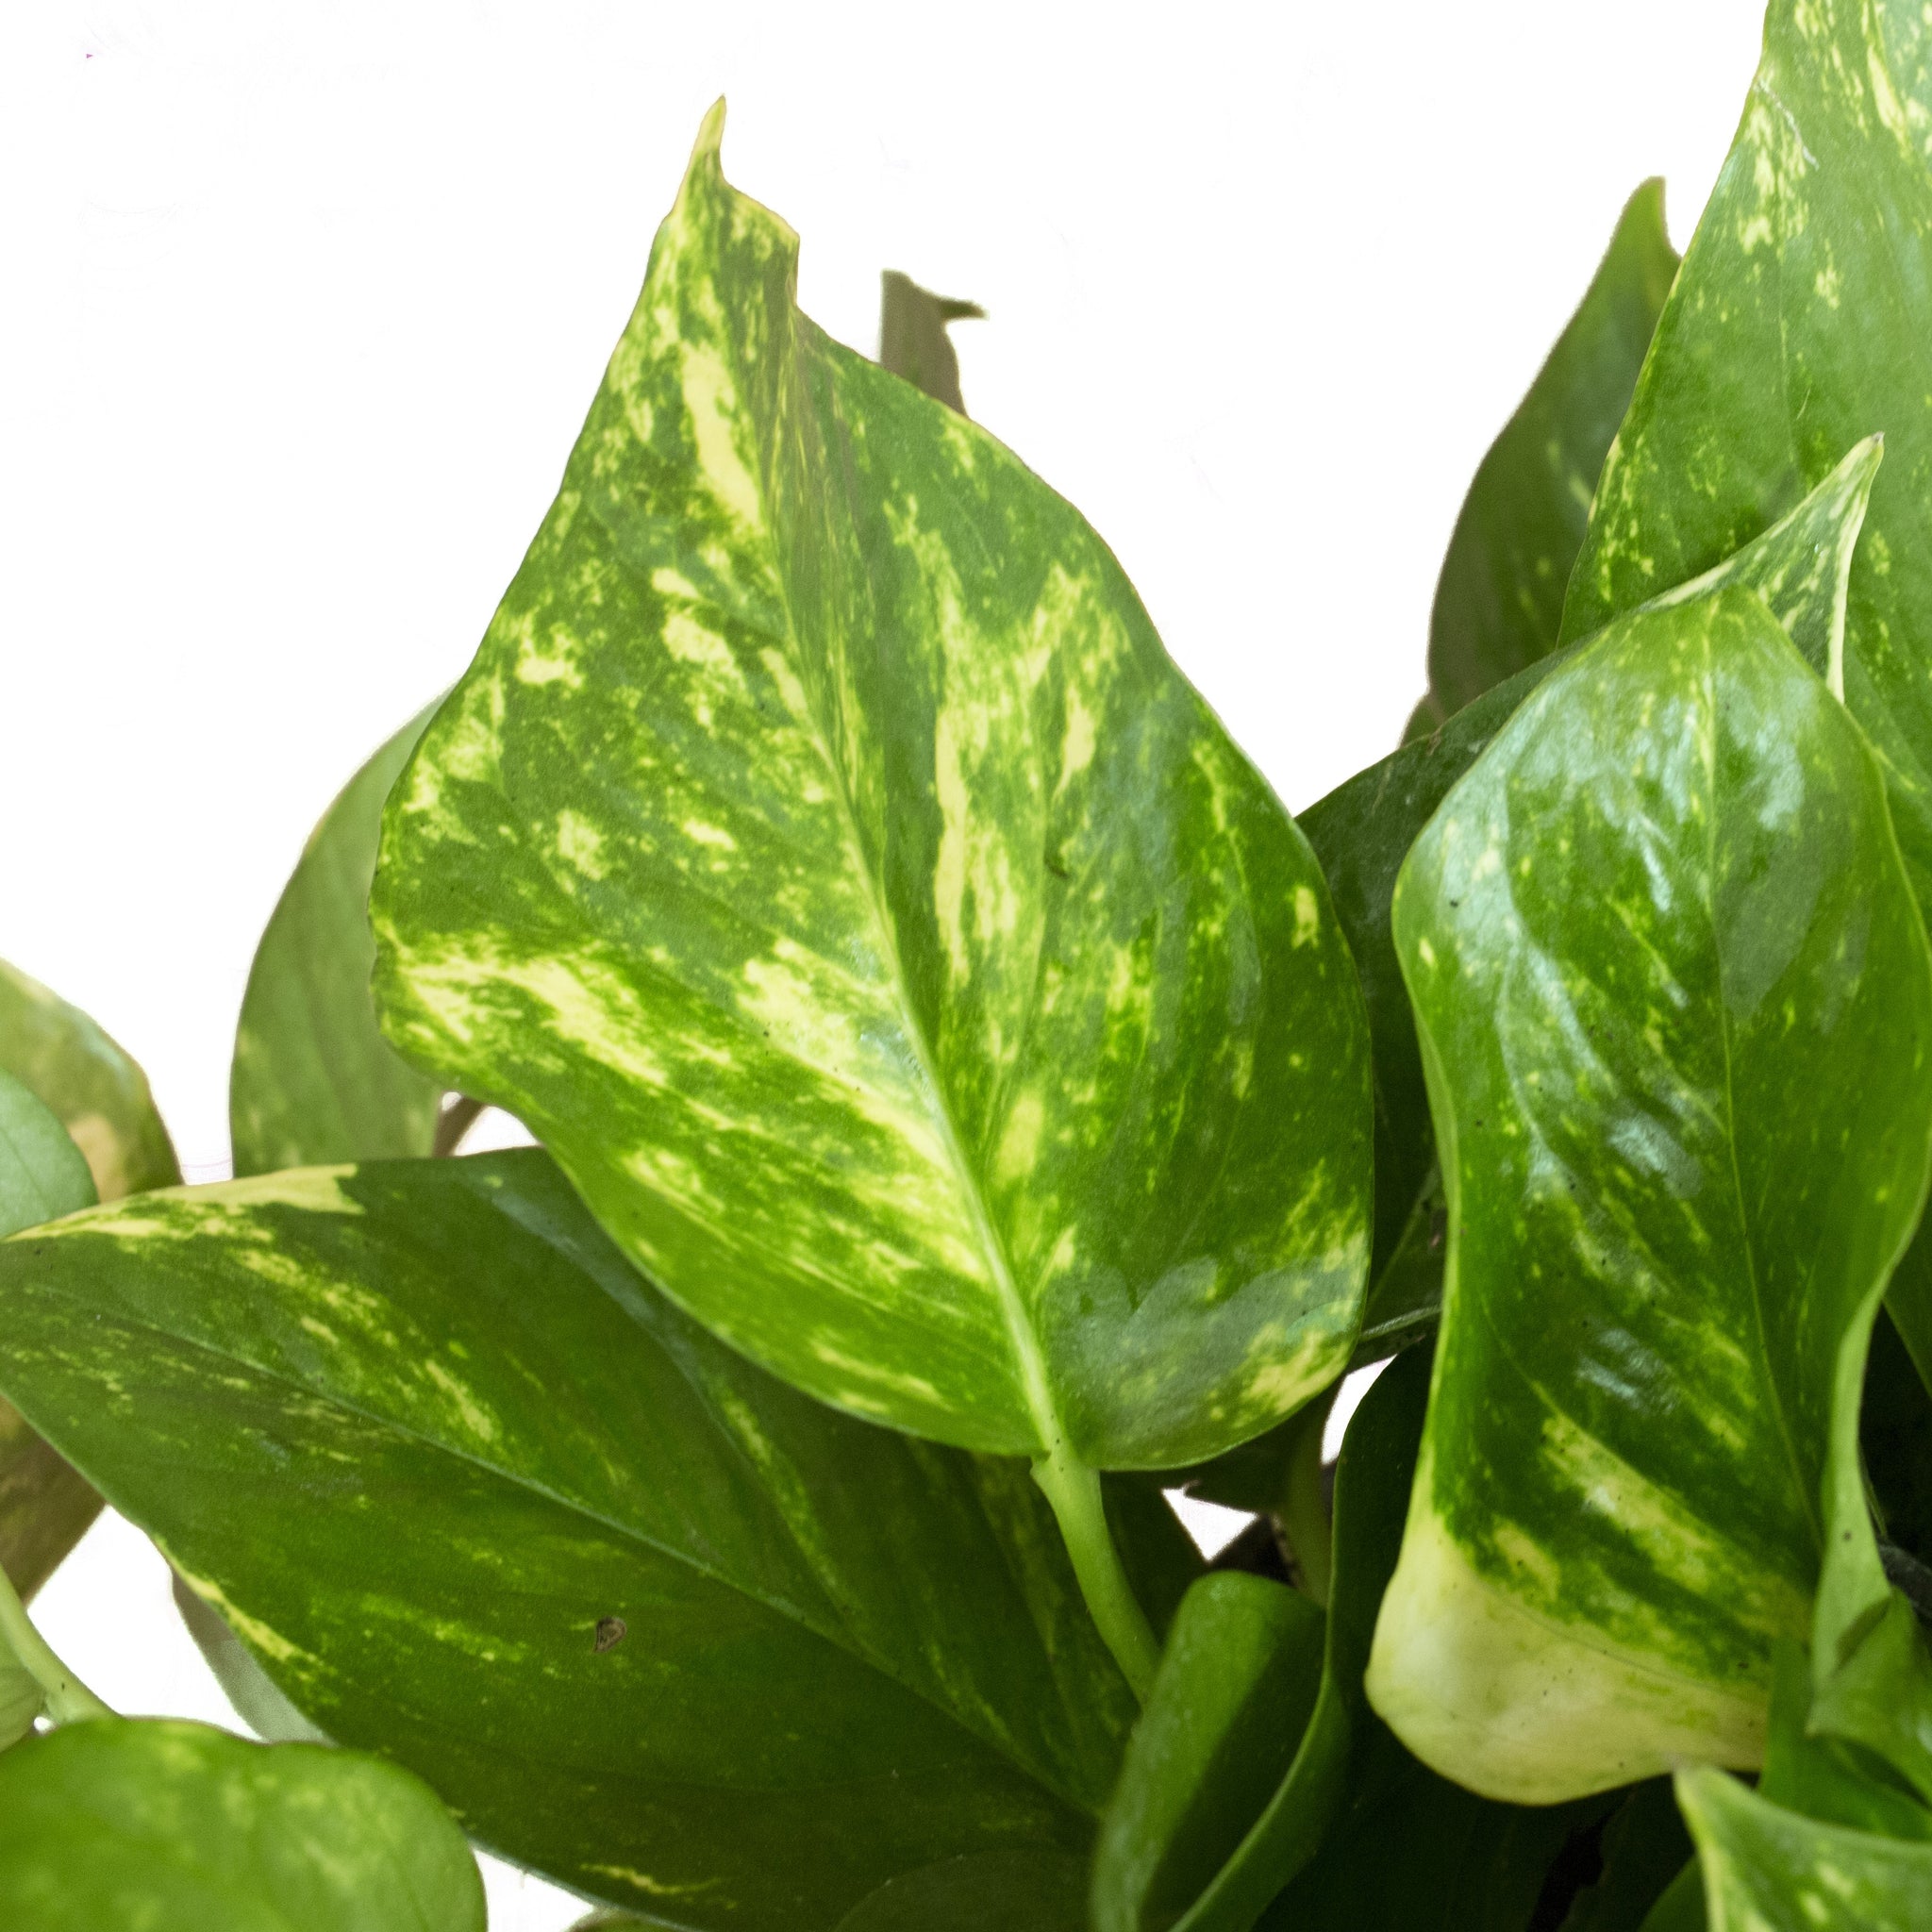 detail view of golden pothos foliage to show green leaves with patches of yellowish cream colors